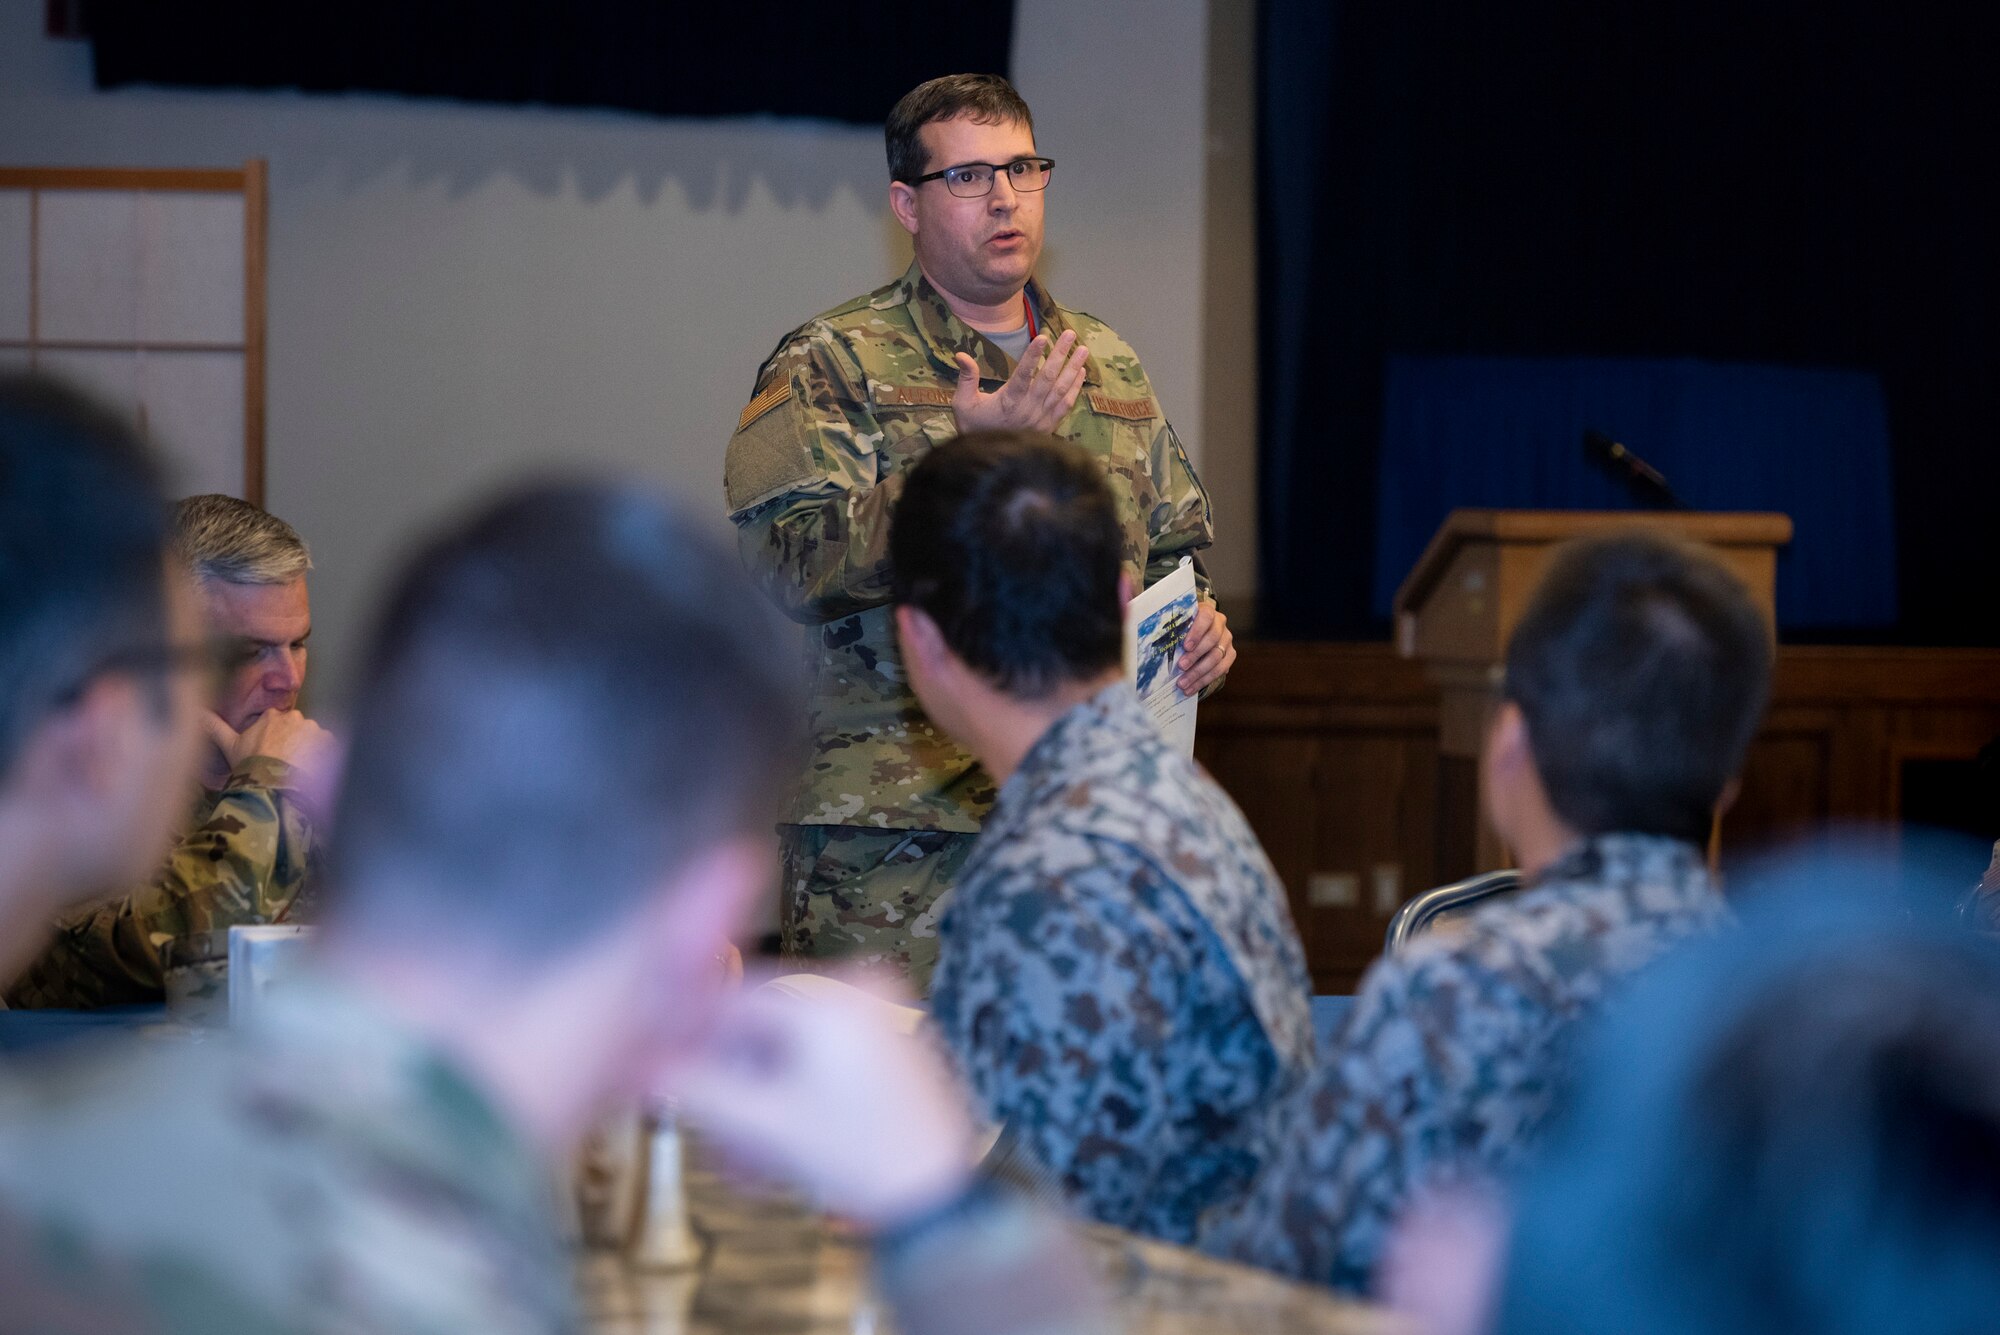 U.S. Air Force Capt. Christopher Alfonso, maintenance exchange officer assigned to the Japanese Air Self-Defense Force’s First Technical School at Hamamatsu Air Base, Japan, briefs 374th Maintenance Group members during a basic maintenance officer tour at Yokota Air Base, Japan, Nov. 21, 2019.